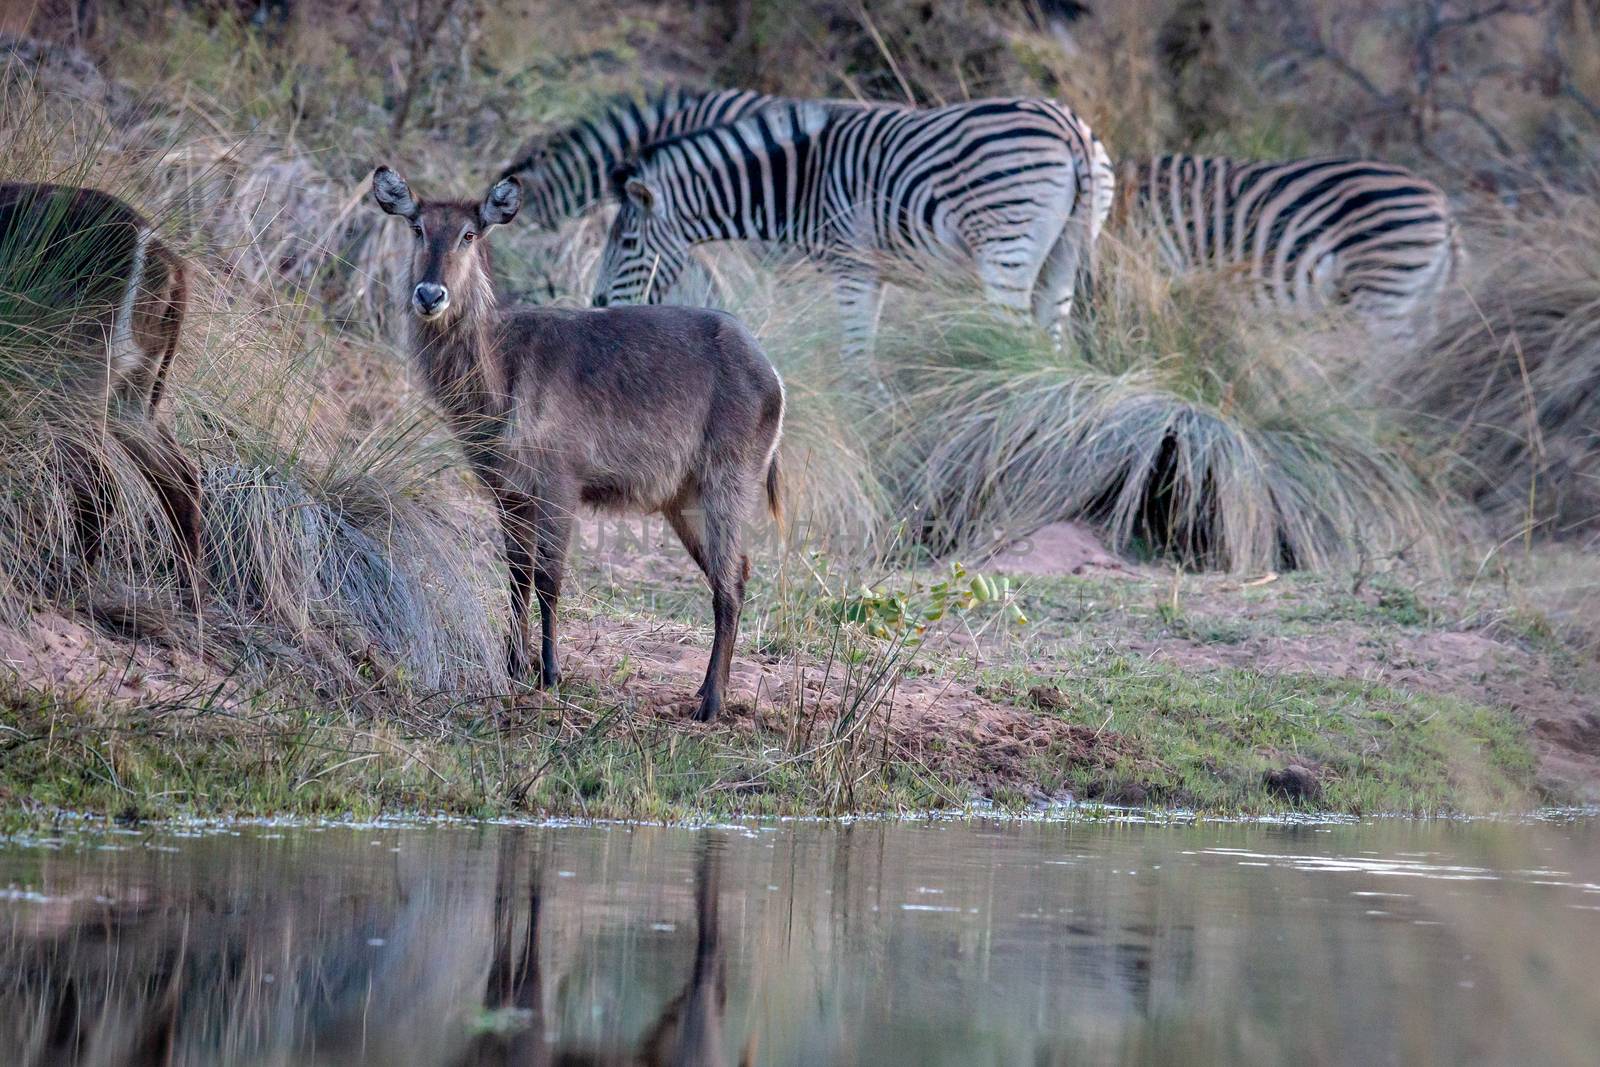 Waterbuck and Zebra standing by the water in the Welgevonden game reserve, South Africa.